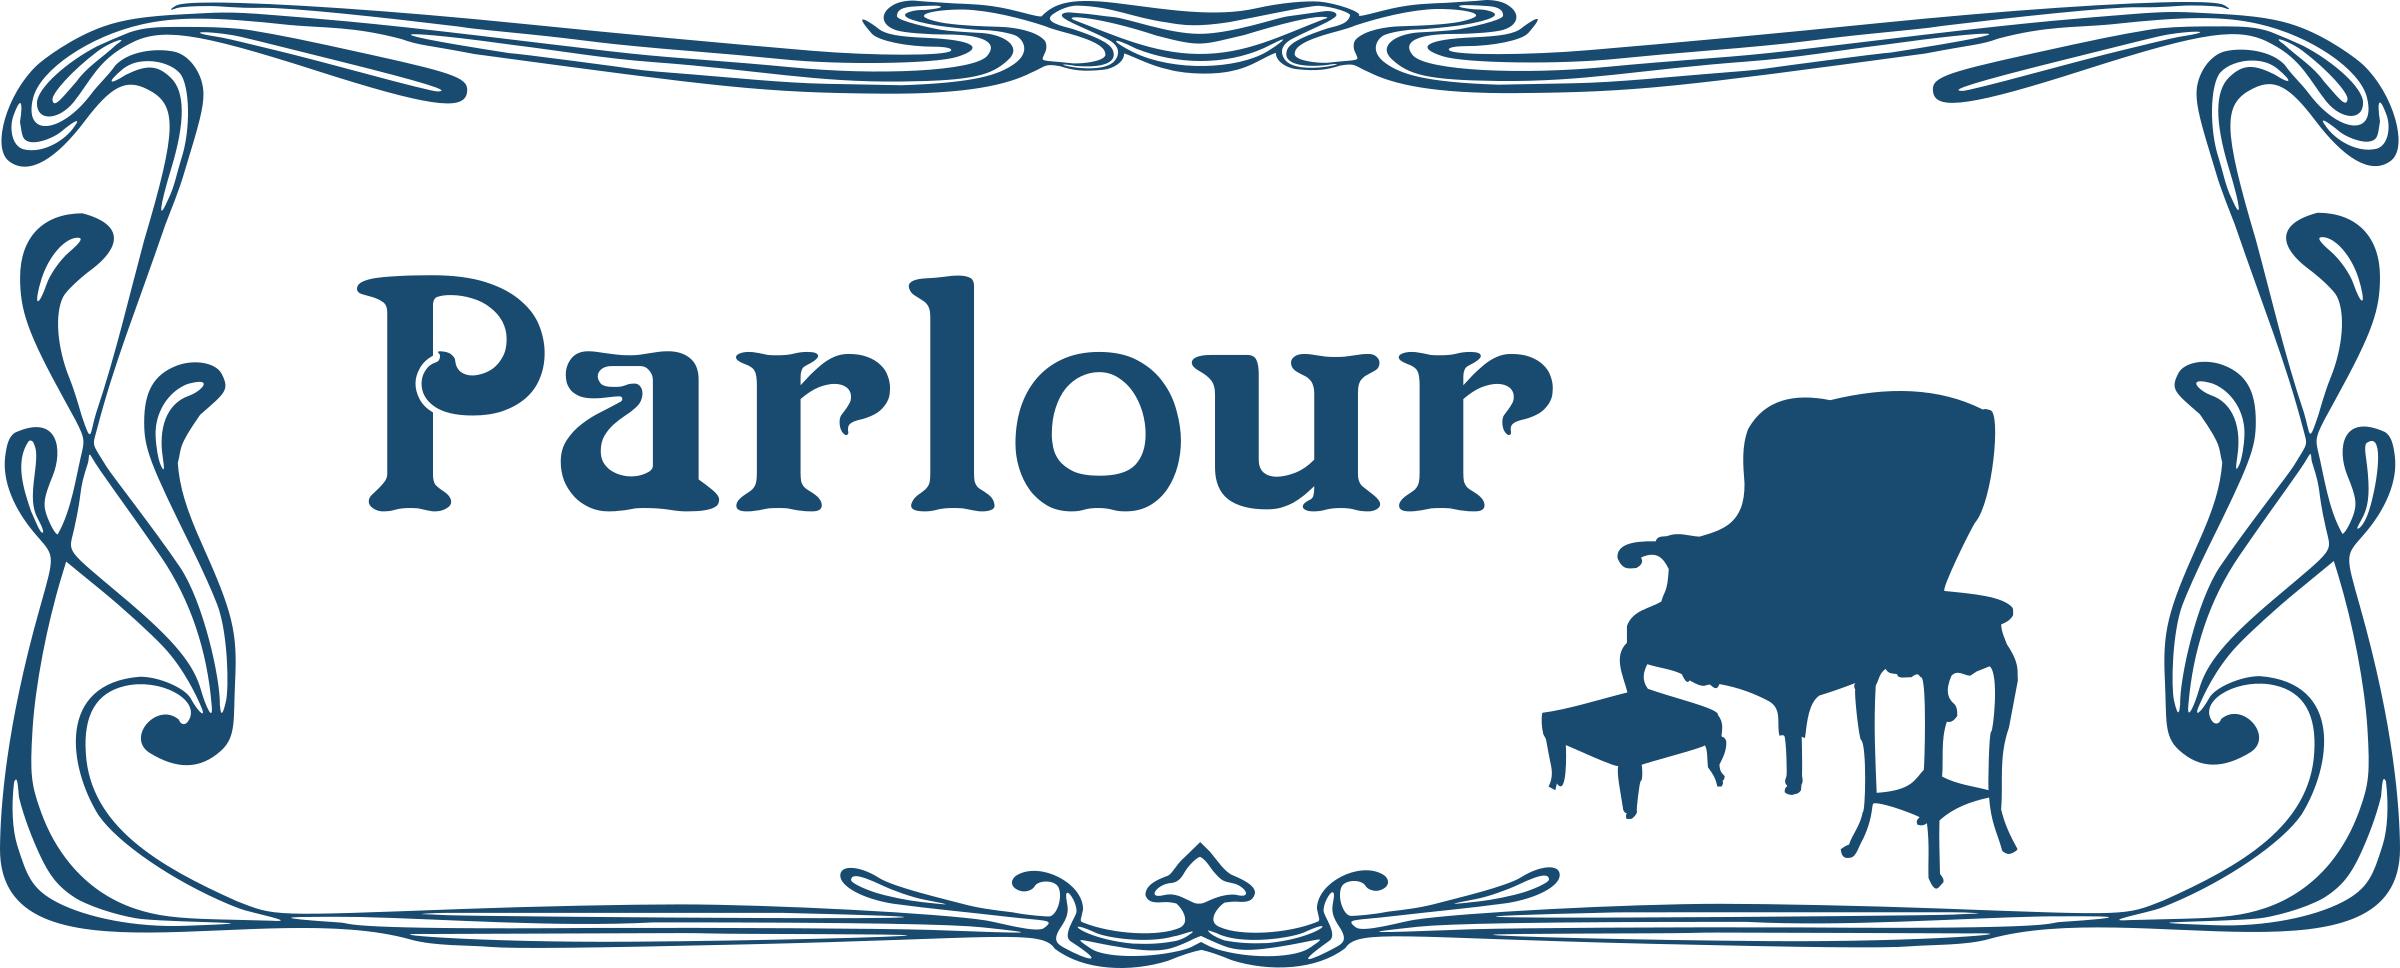 Parlour door sign PNG icons